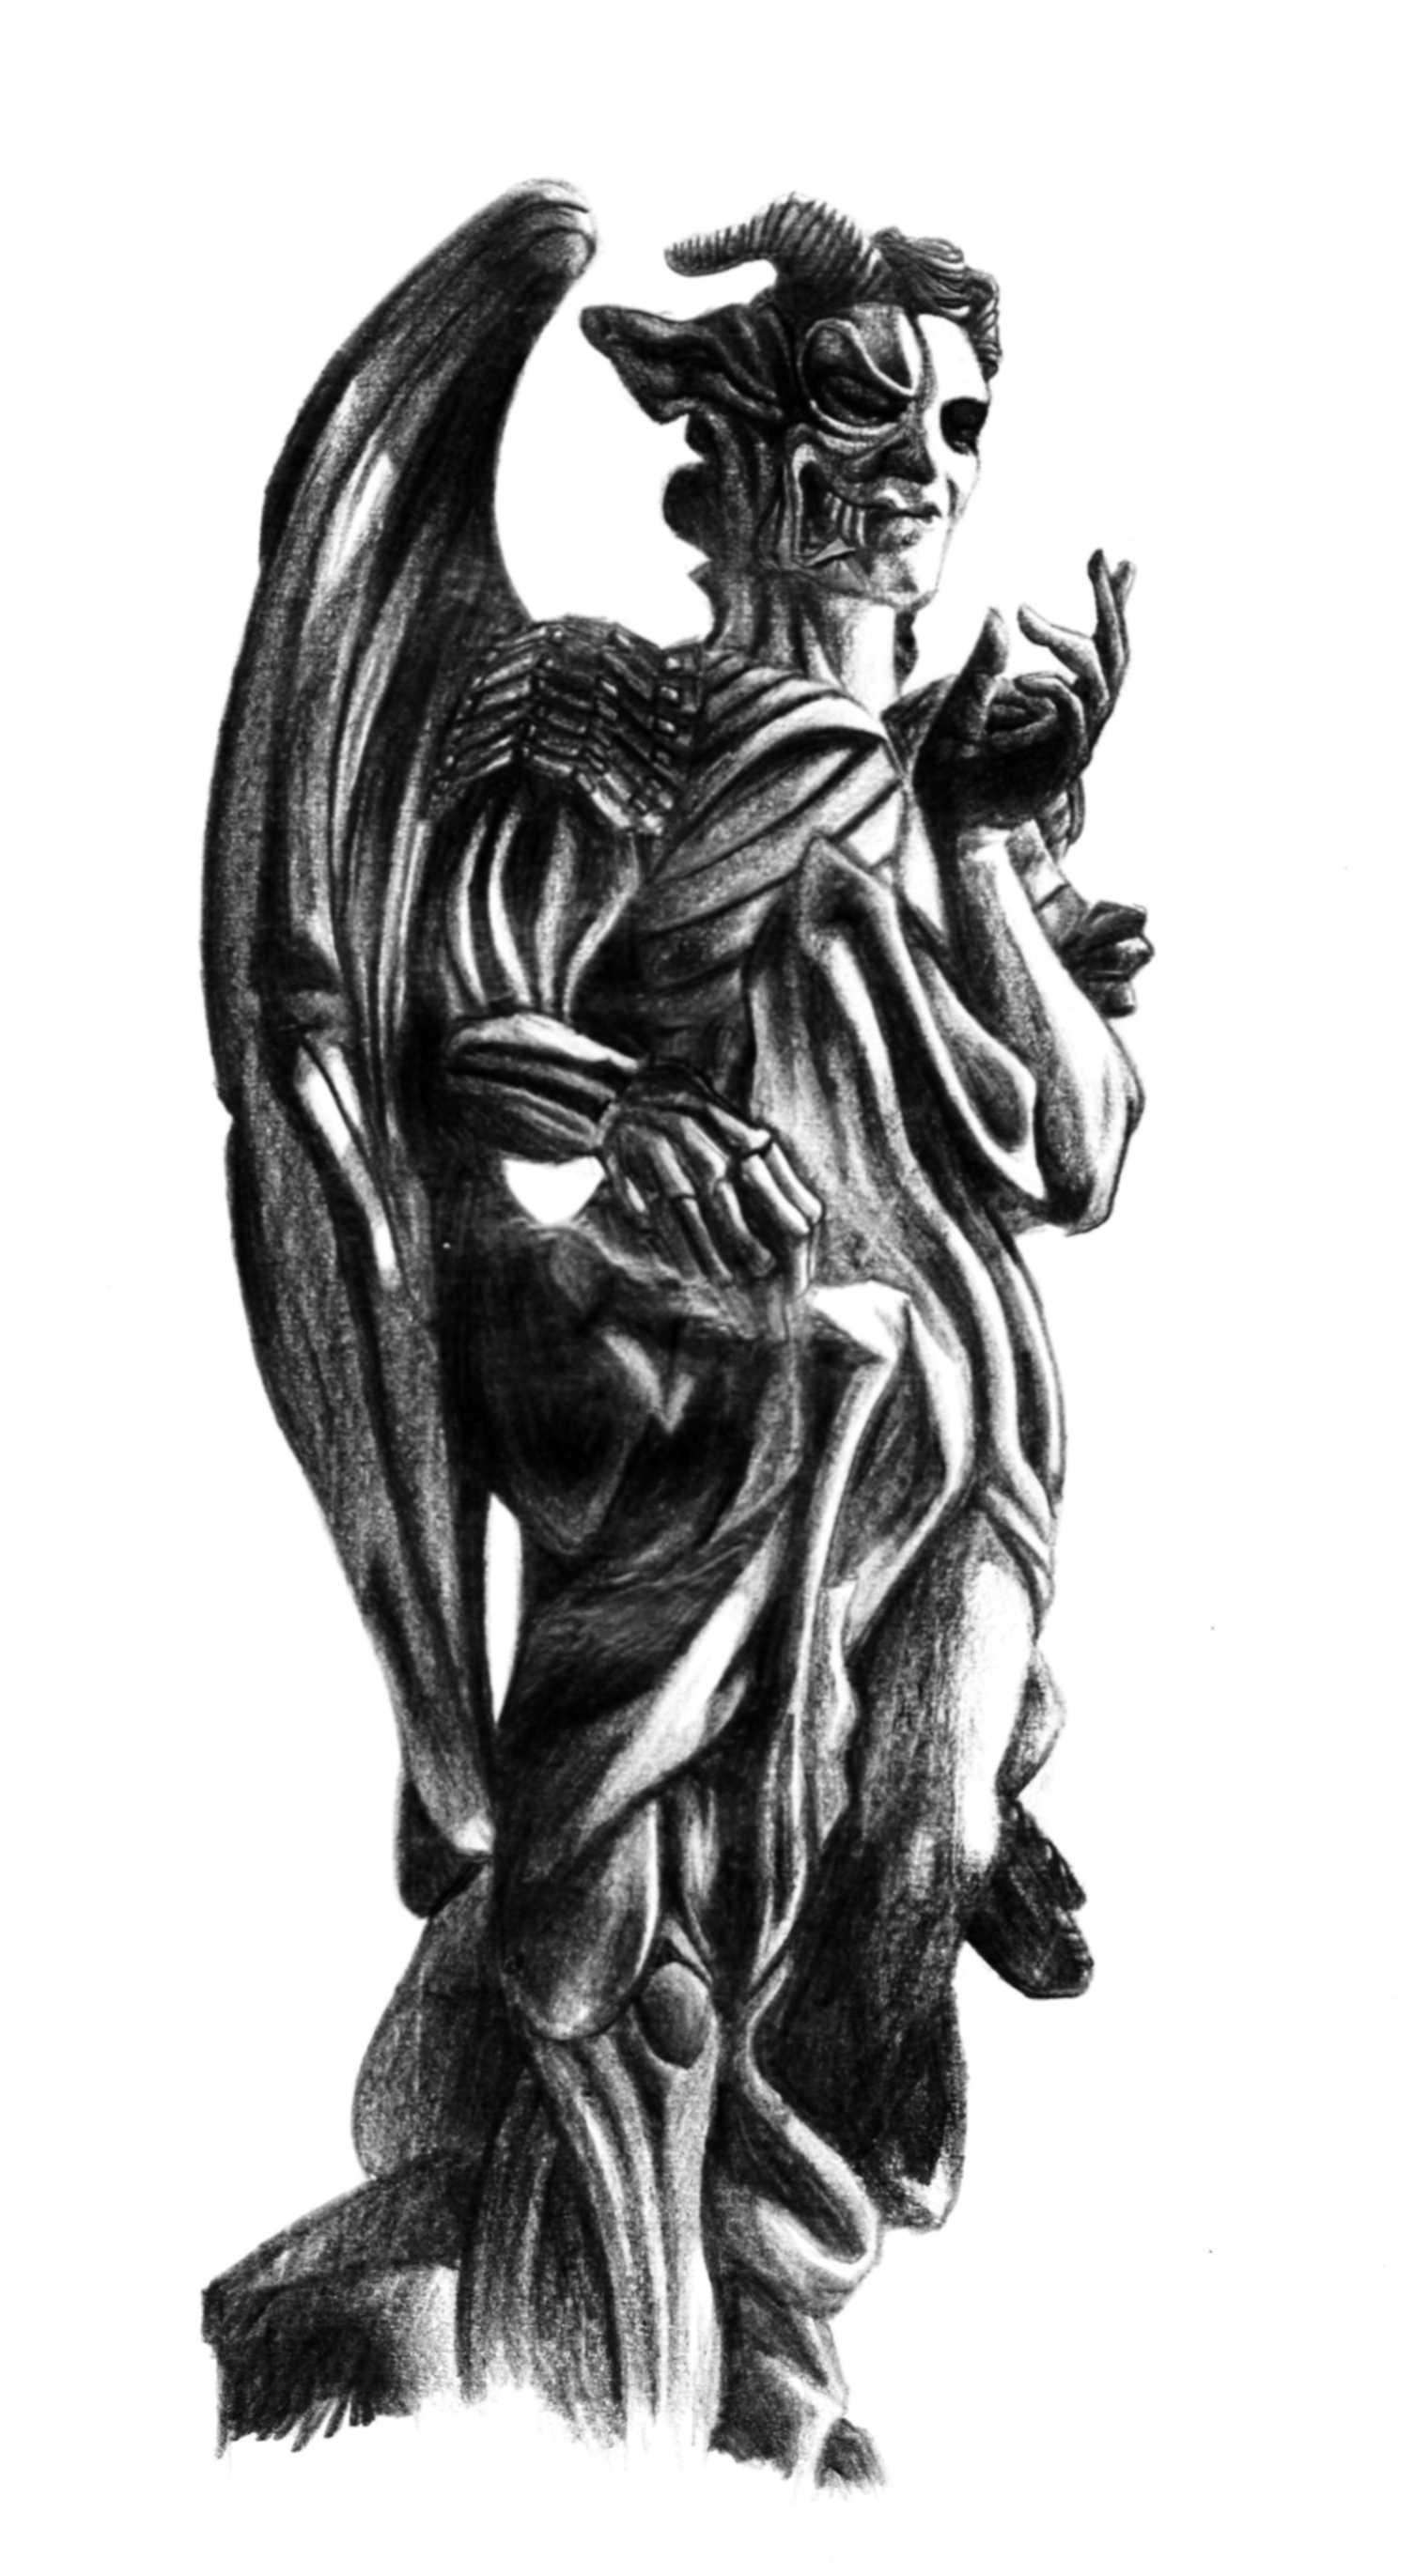 Demon Drawing Statue For Free Download And Demons Statue Design